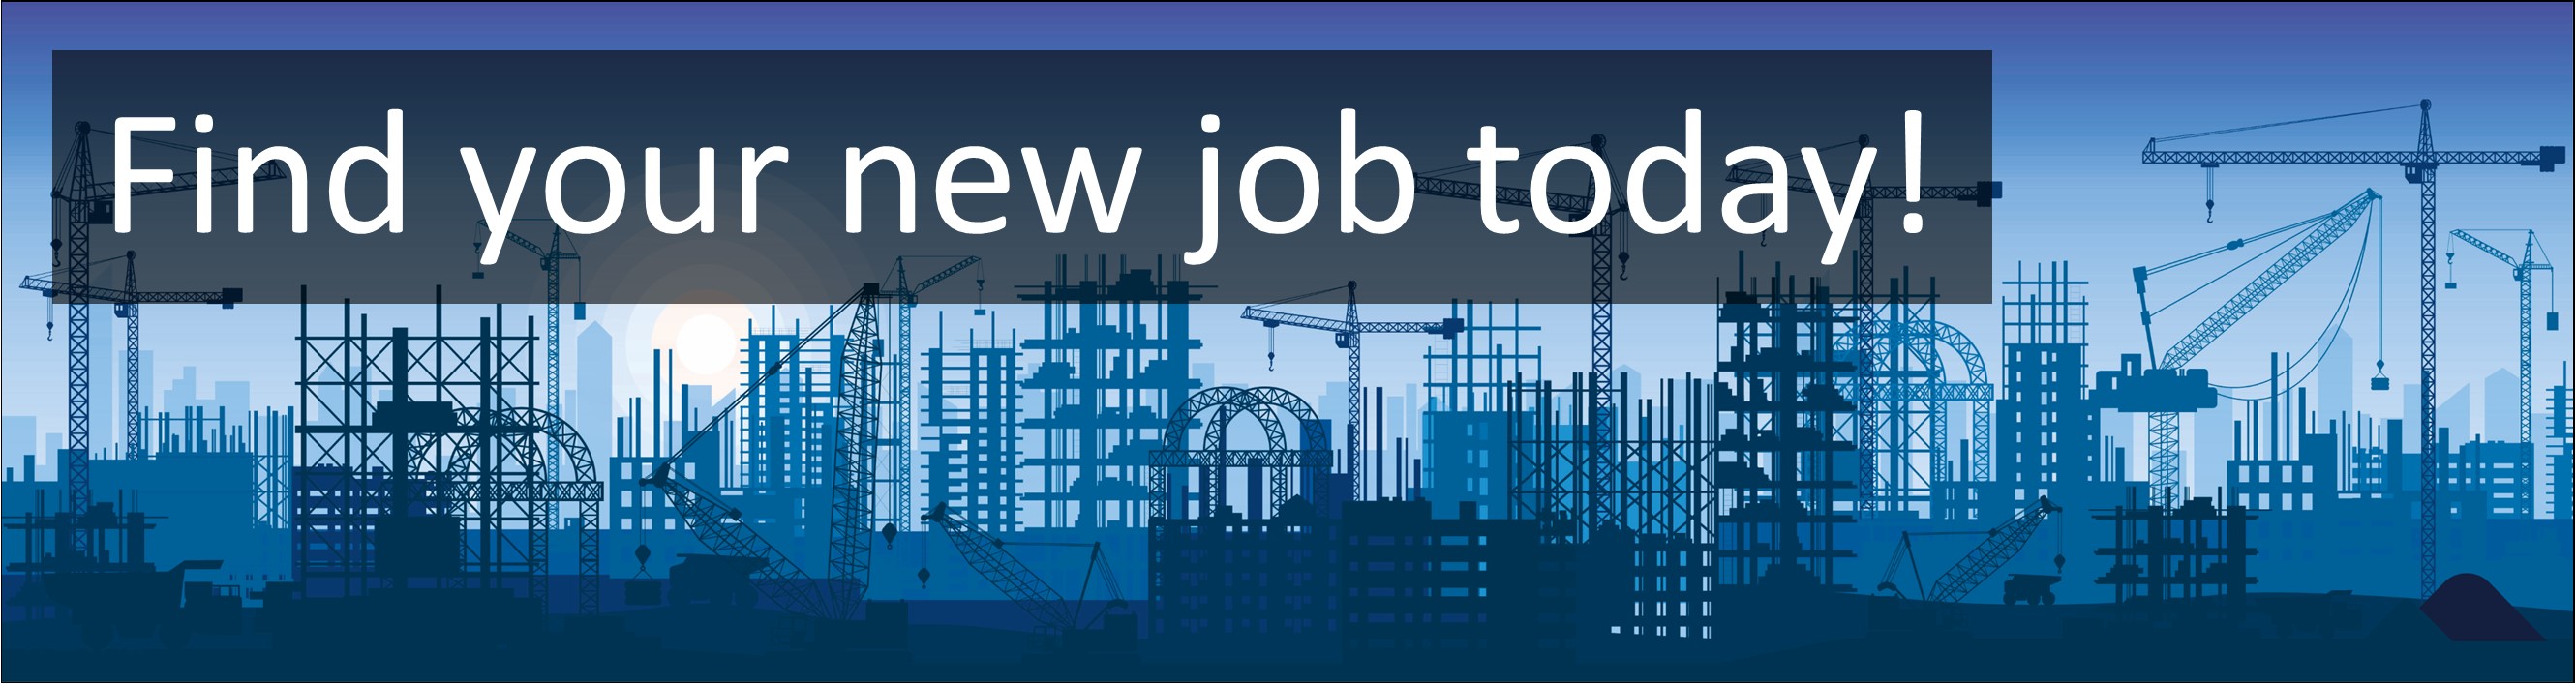 Construction & Trades Jobs. Handyperson / Caretaker / Maintenance Operative Jobs, Careers & Vacancies in Burnham, Slough, Buckinghamshire Advertised by AWD online – Multi-Job Board Advertising and CV Sourcing Recruitment Services